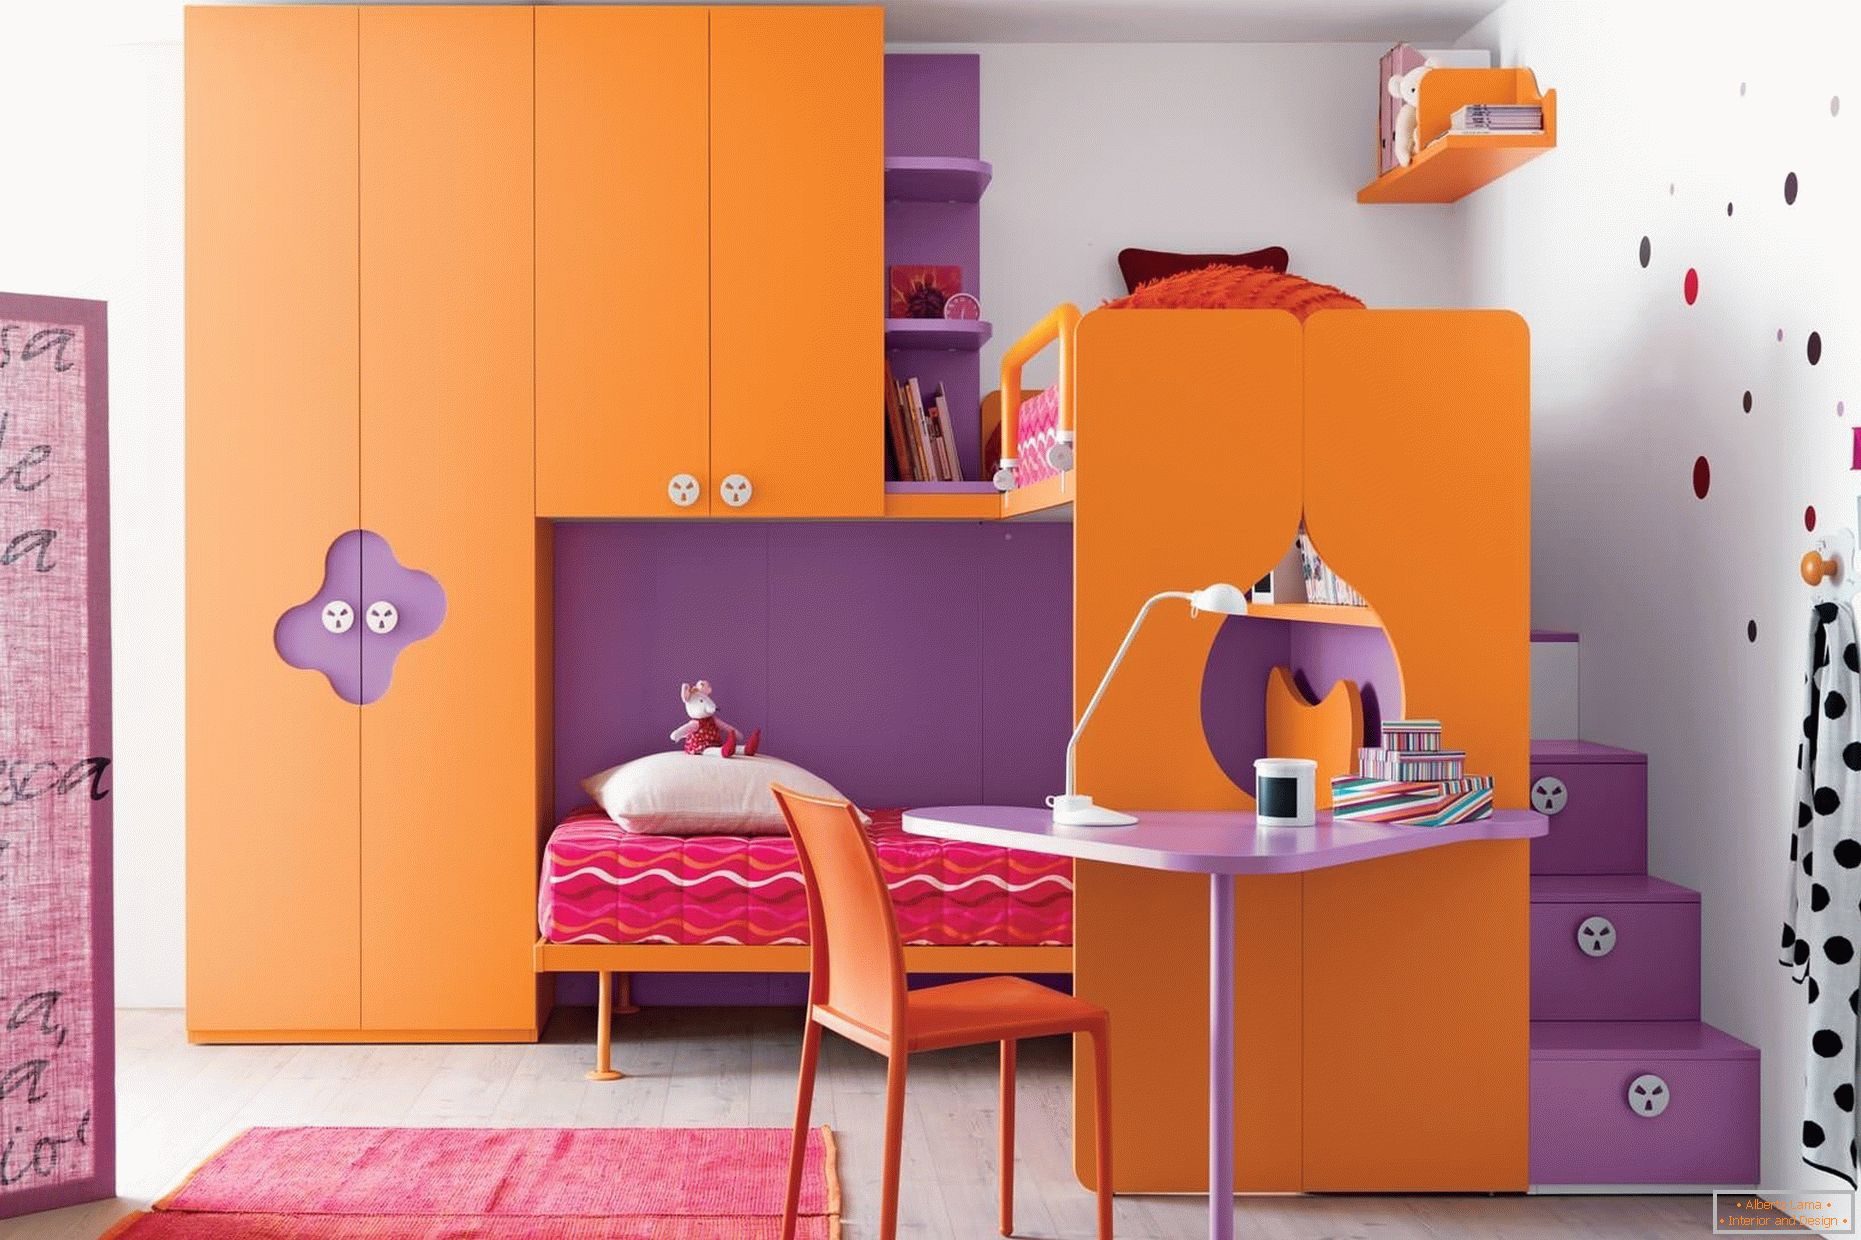 The combination of lilac and orange